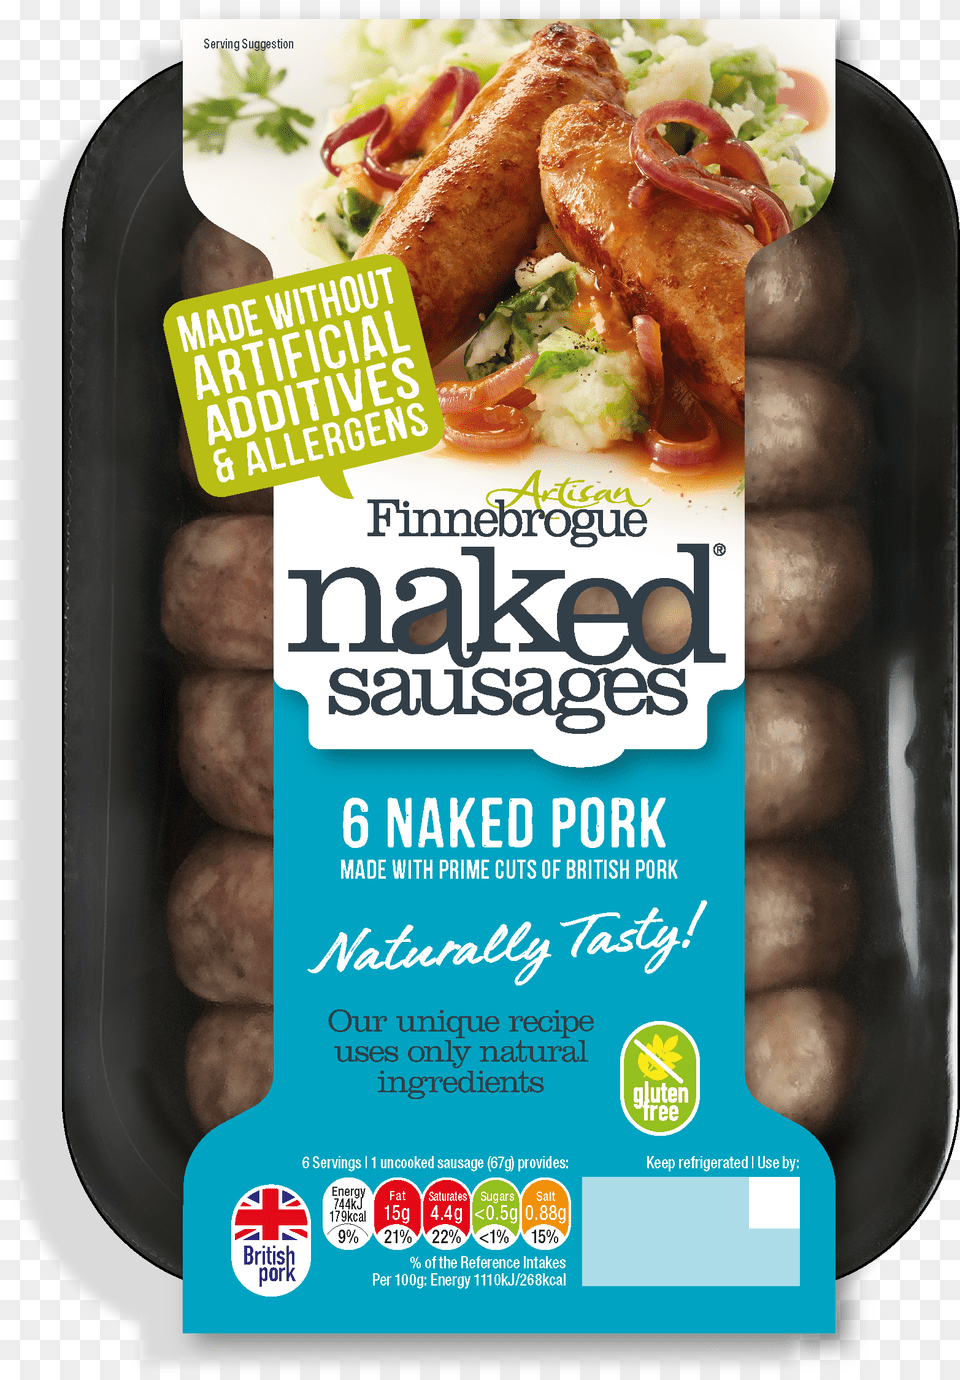 Finnebrogue Naked Sausages, Advertisement, Food, Lunch, Meal Png Image